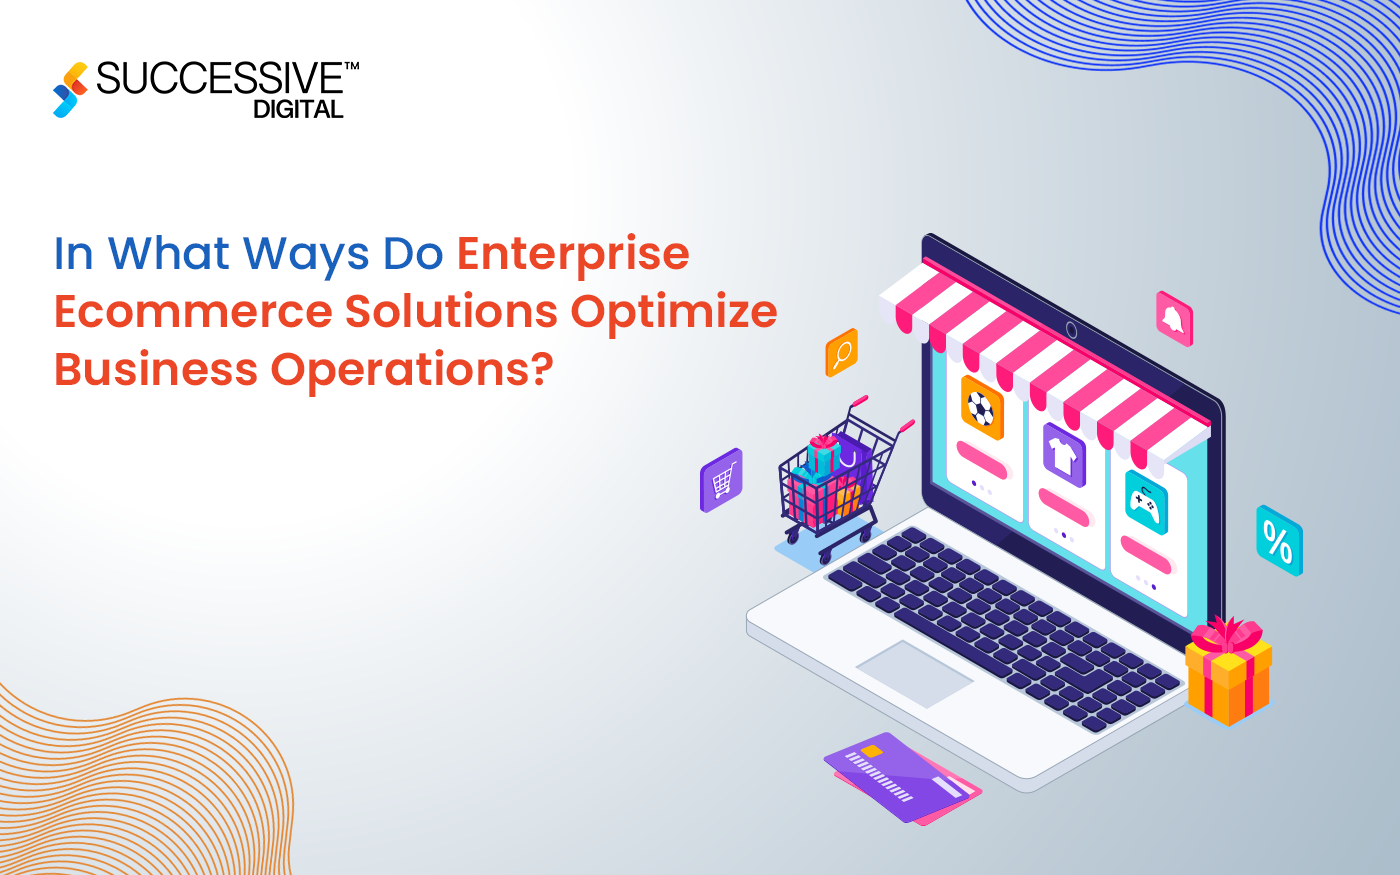 In What Ways Do Enterprise Ecommerce Solutions Optimize Business Operations?